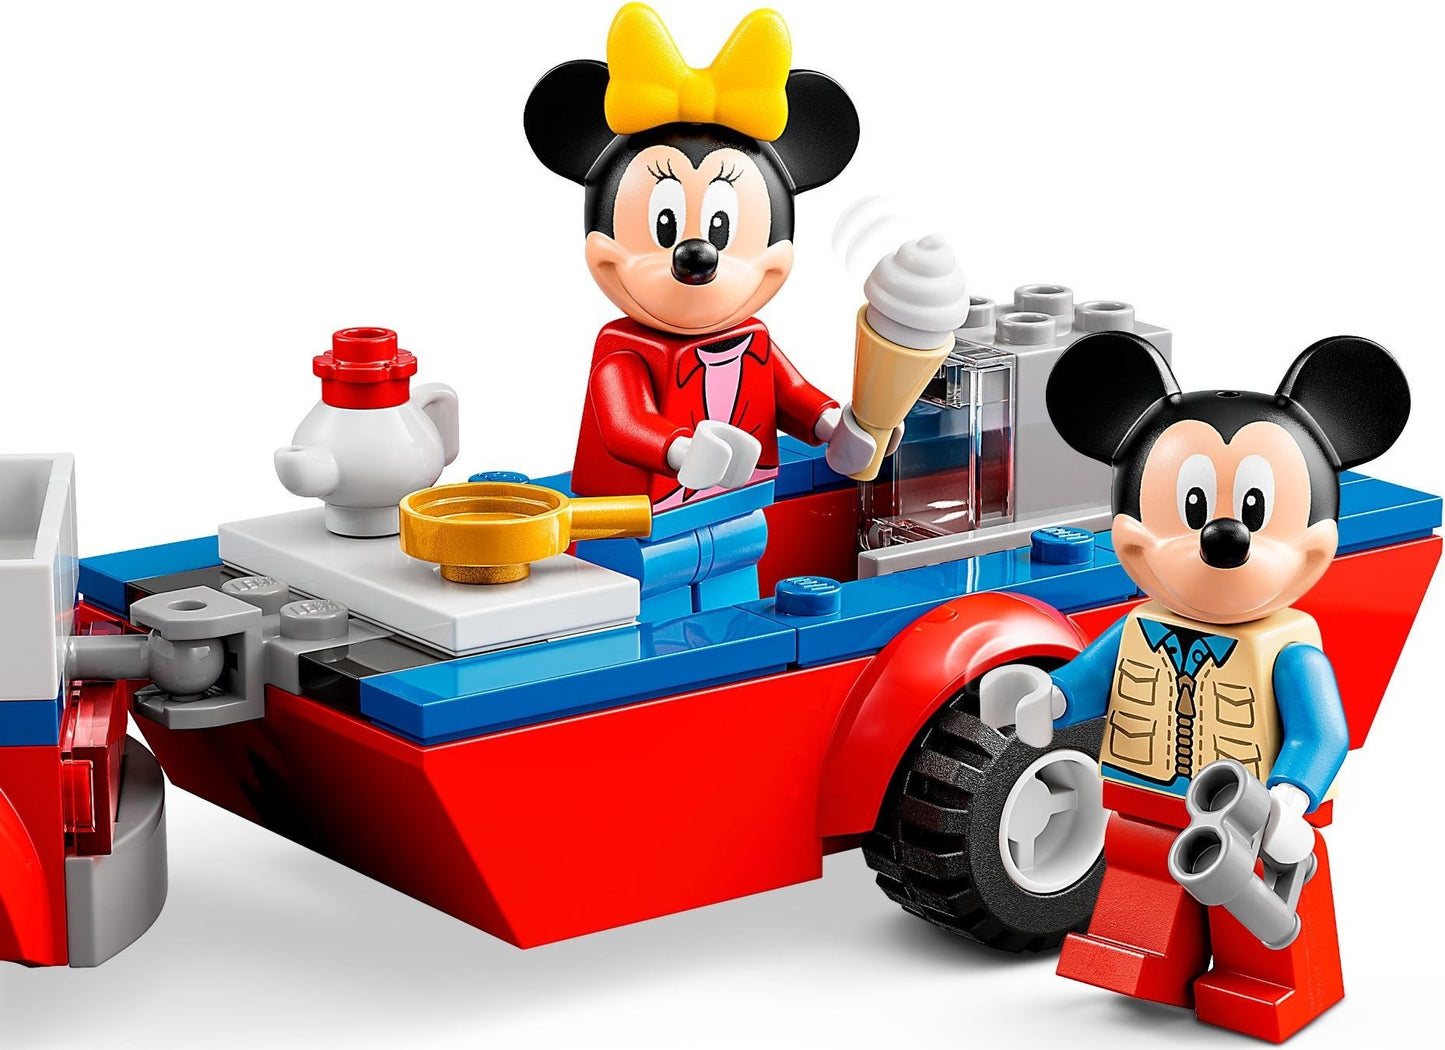 Set de constructie LEGO Disney Mickey and Friends Camping cu Mickey Mouse si Minnie Mouse 10777, 103 piese